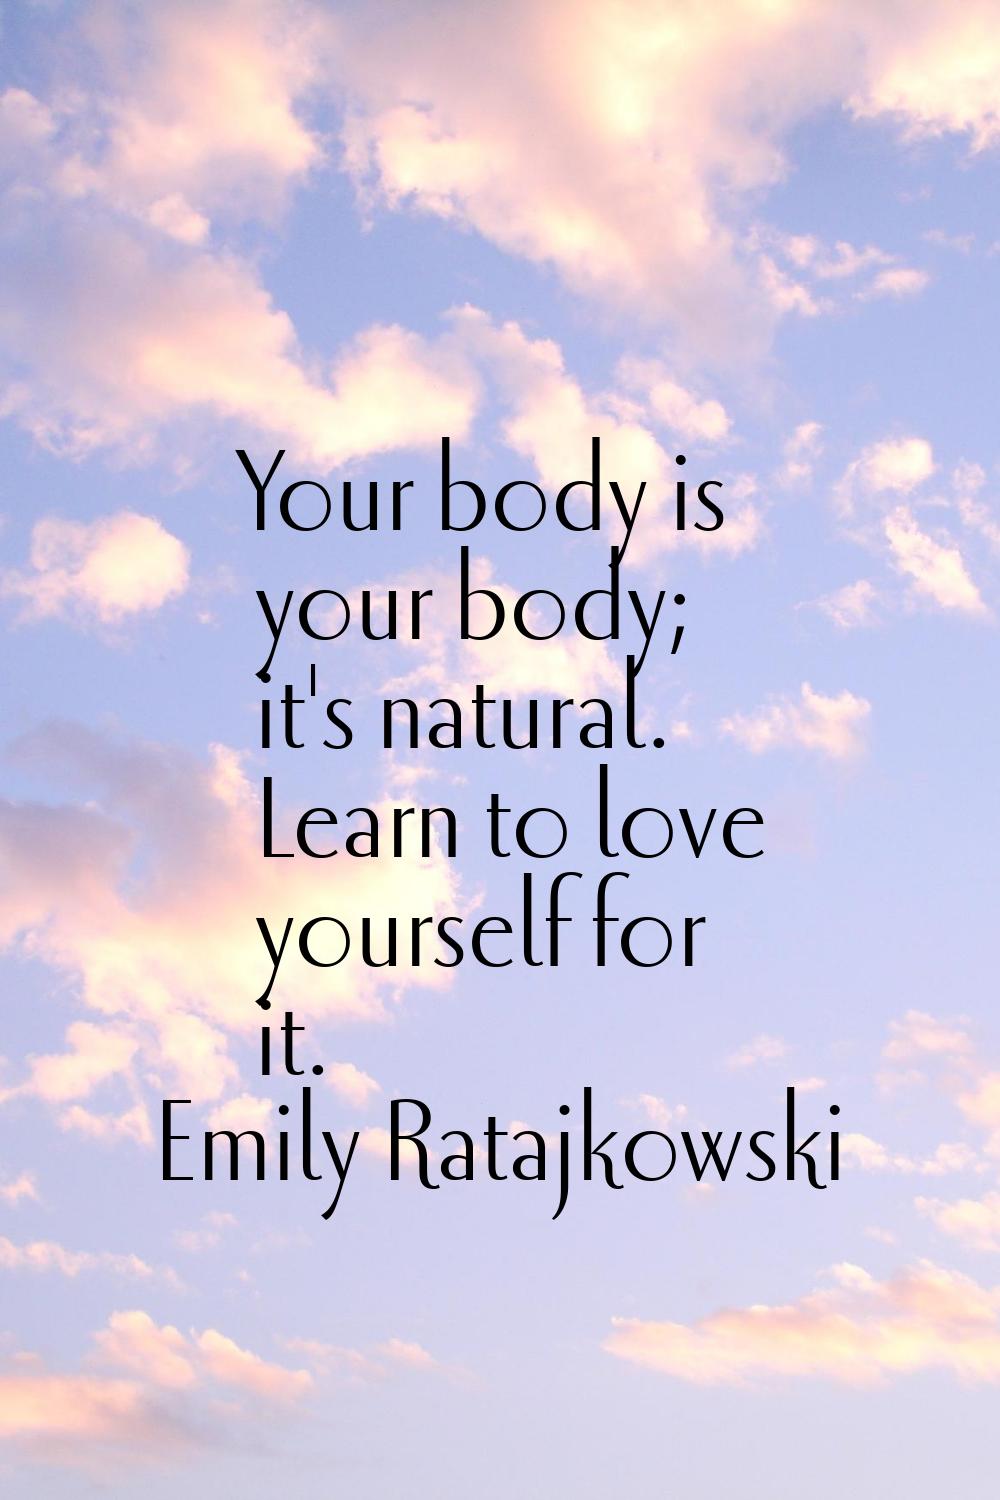 Your body is your body; it's natural. Learn to love yourself for it.